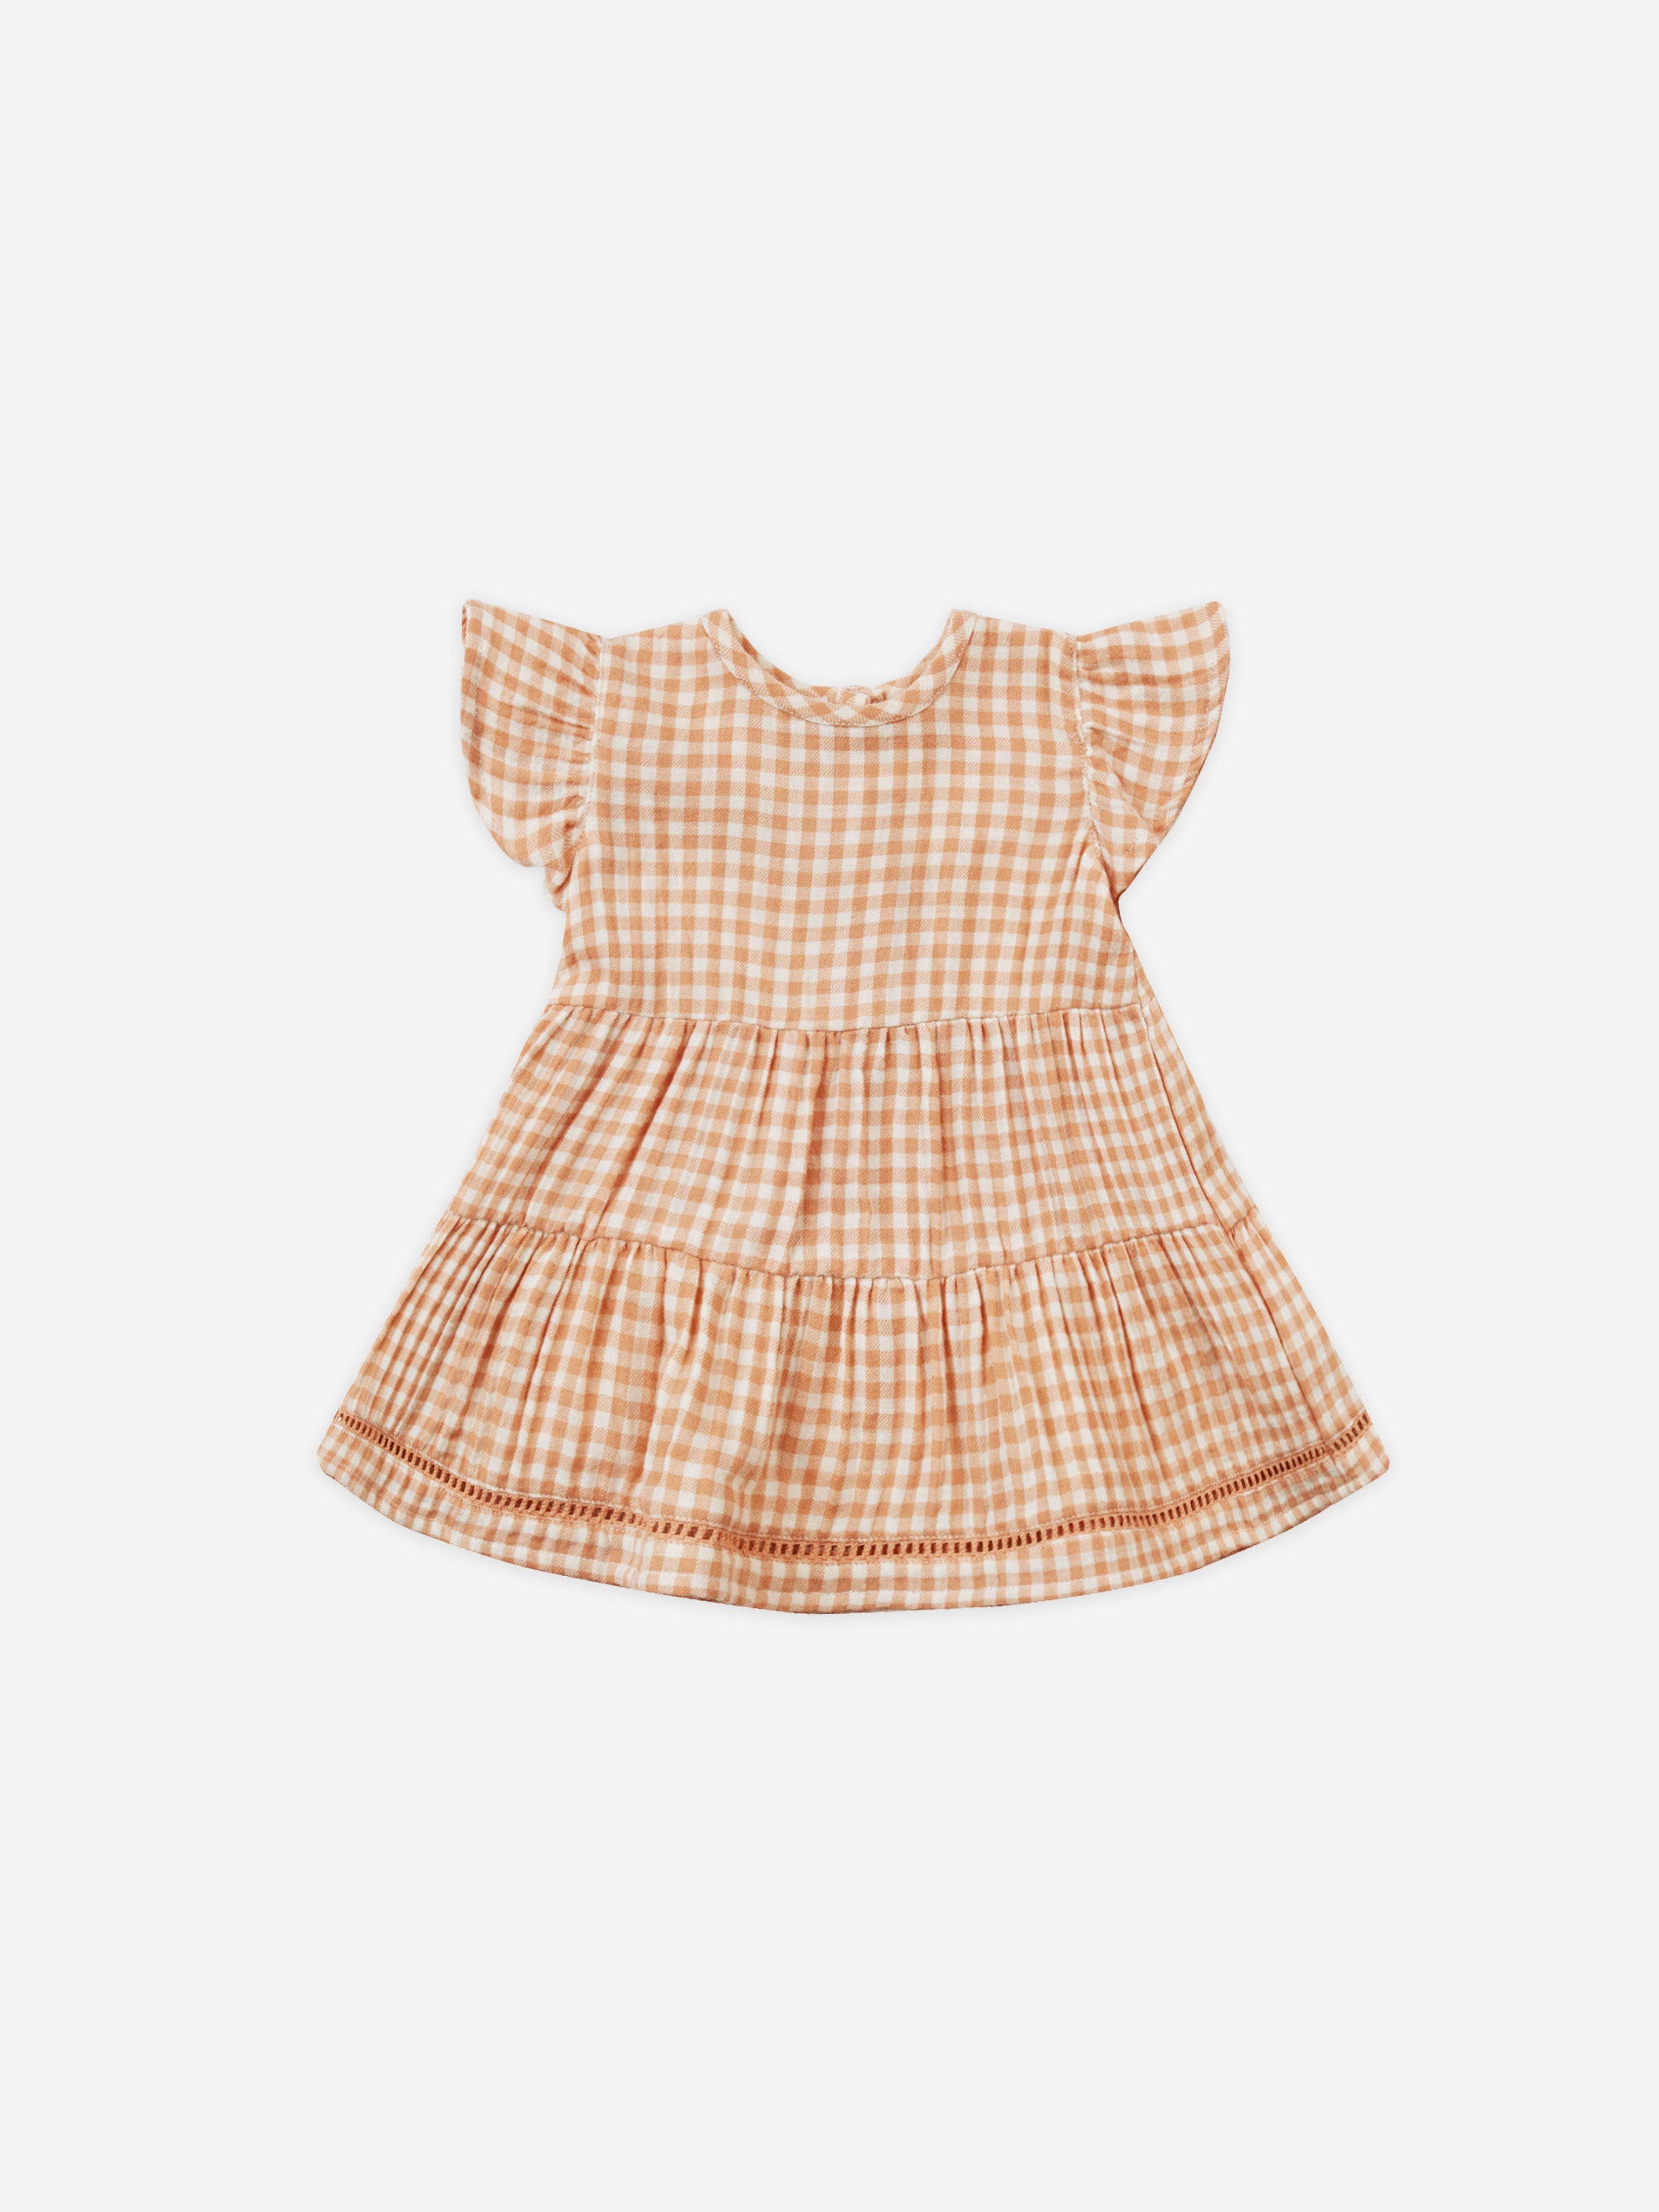 Lily Dress || Melon Gingham - Rylee + Cru | Kids Clothes | Trendy Baby Clothes | Modern Infant Outfits |